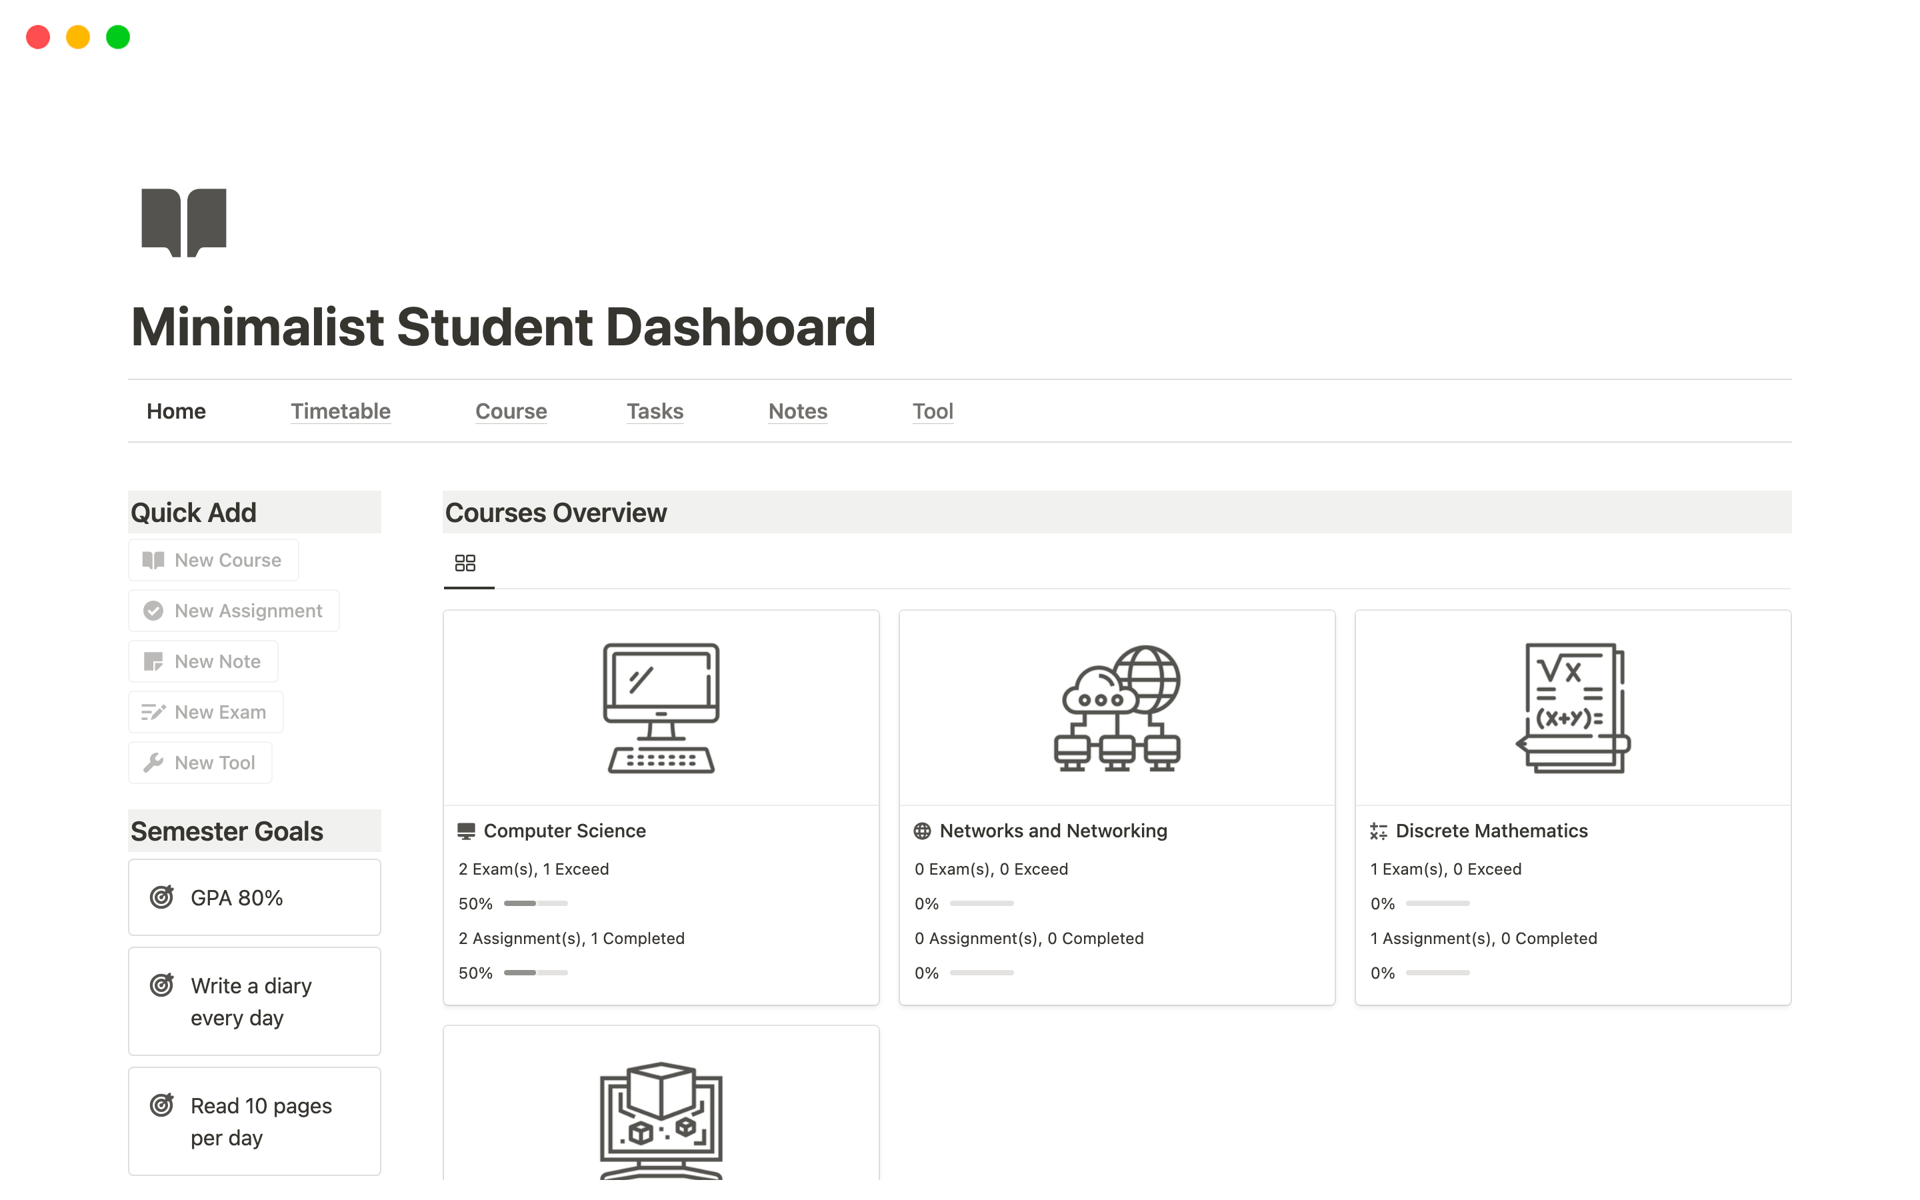 Simplify your student life and elevate your organization with the Minimalist Student Dashboard. Effortlessly arrange courses, assignments, exams, notes and assignment tools, reducing the hassle while striving for top grades.